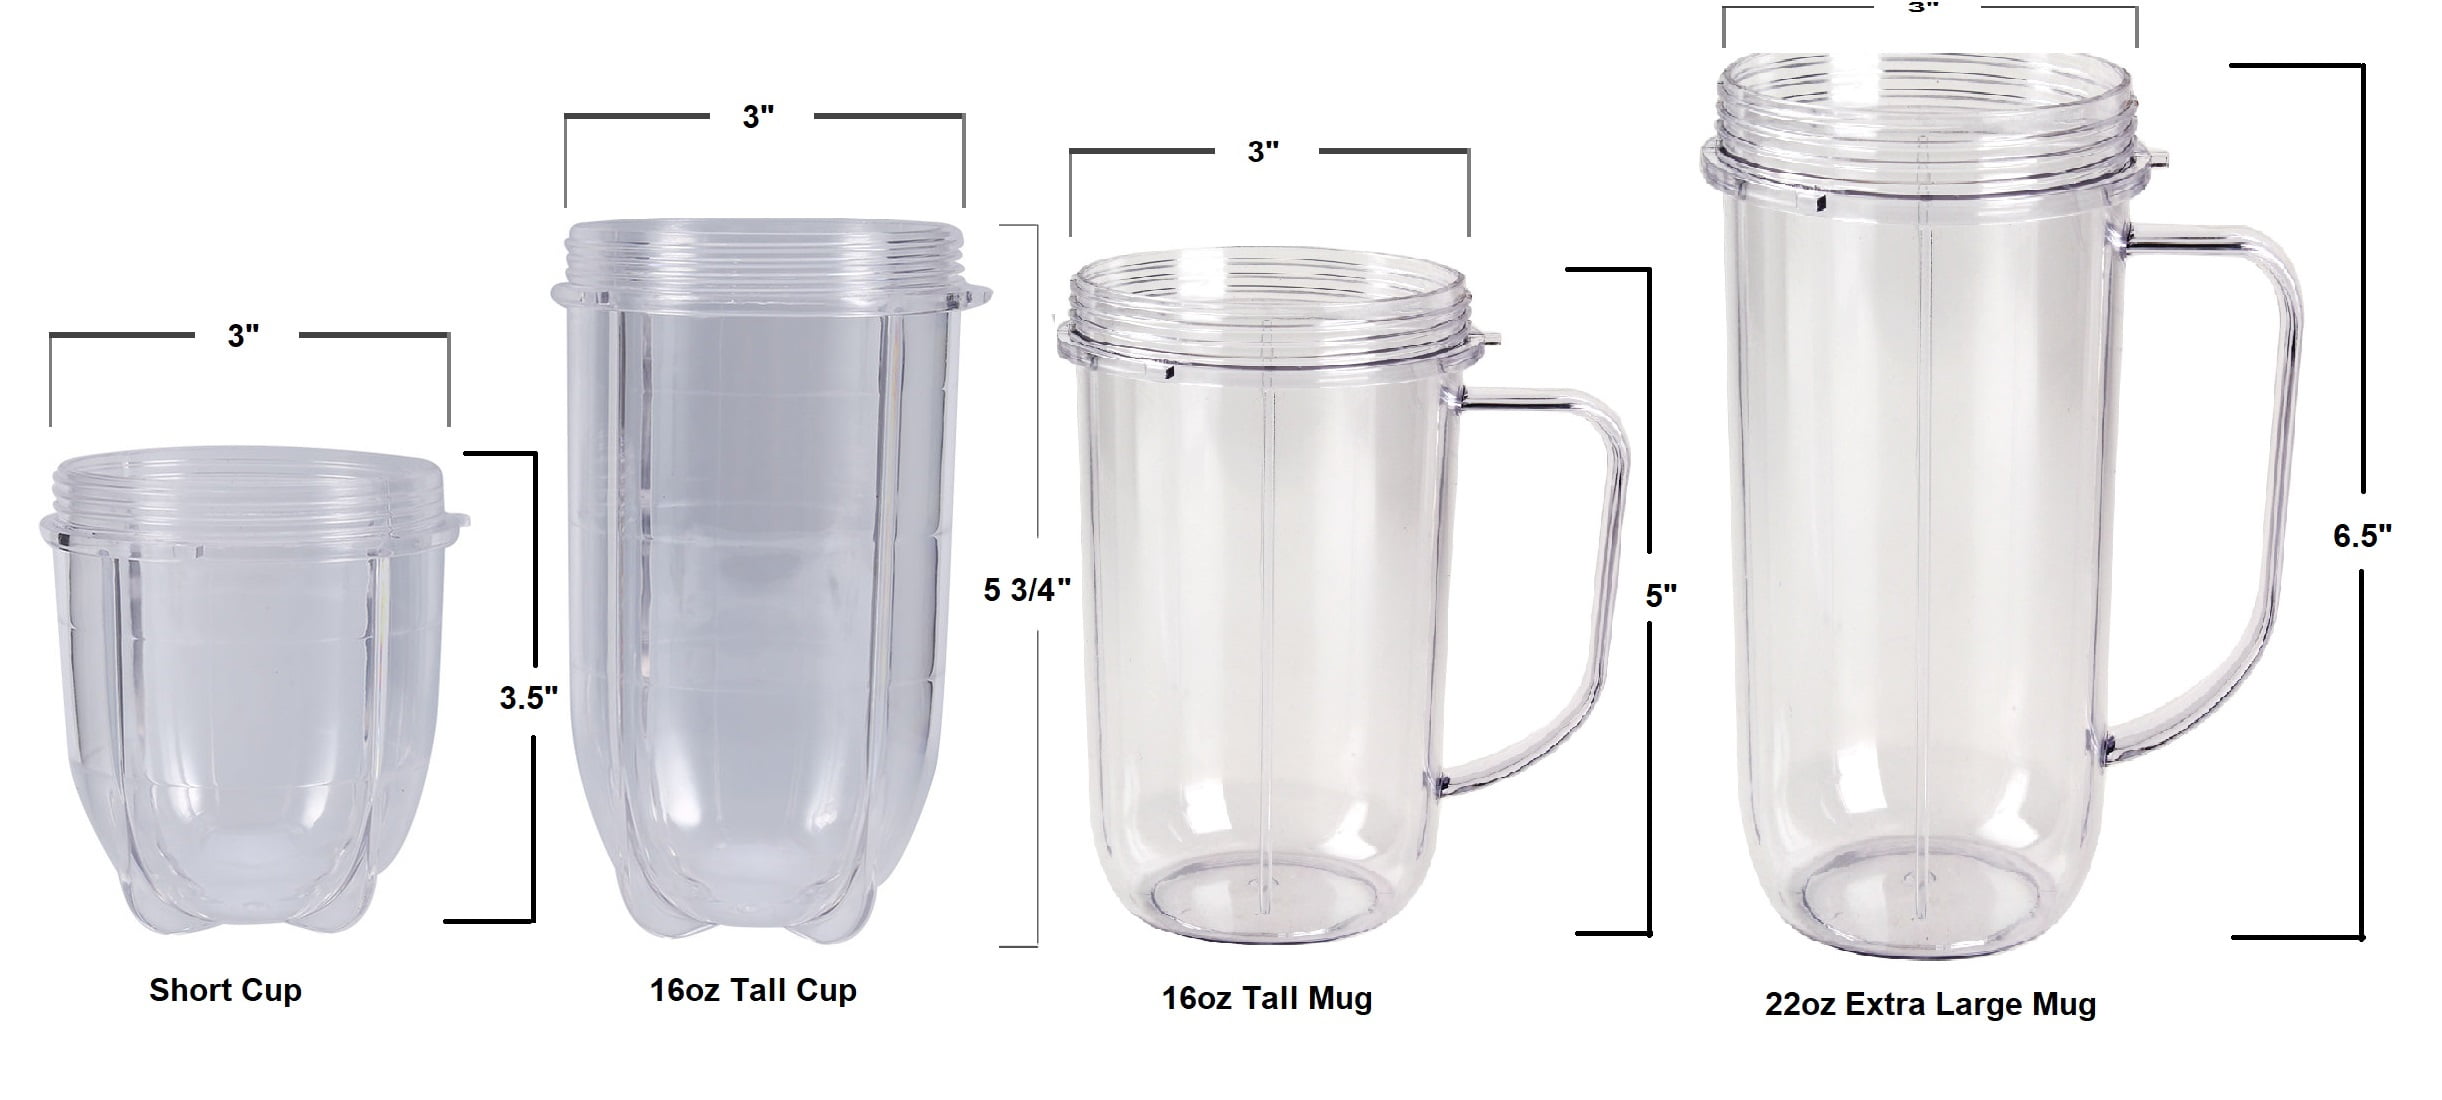 Magic Bullet Blender Set of 7 Clear Party Mugs Cups w/ Colored